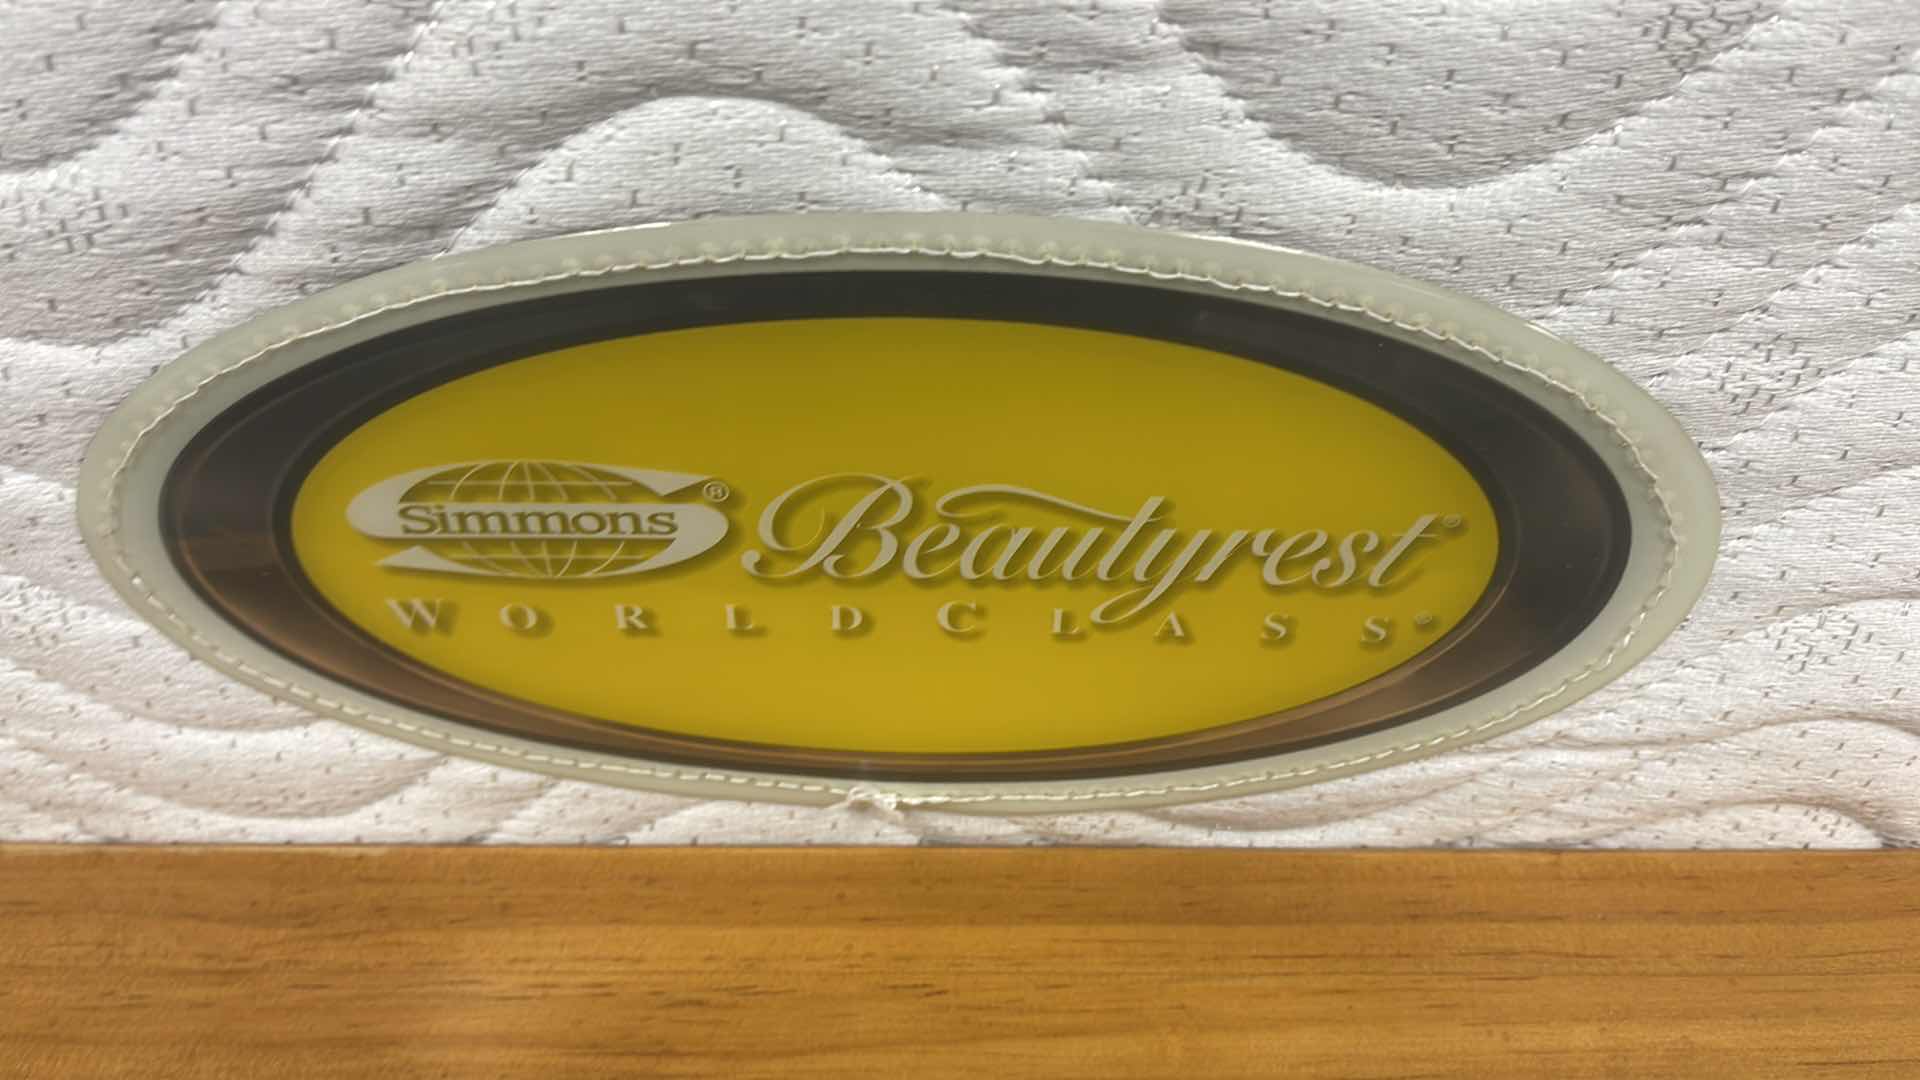 Photo 2 of SIMMONS BEAUTYREST WORLD CLASS MATTRESS WAS FACTORY SEALED BEFORE PICTURES(BED SOLD SEPARATELY)